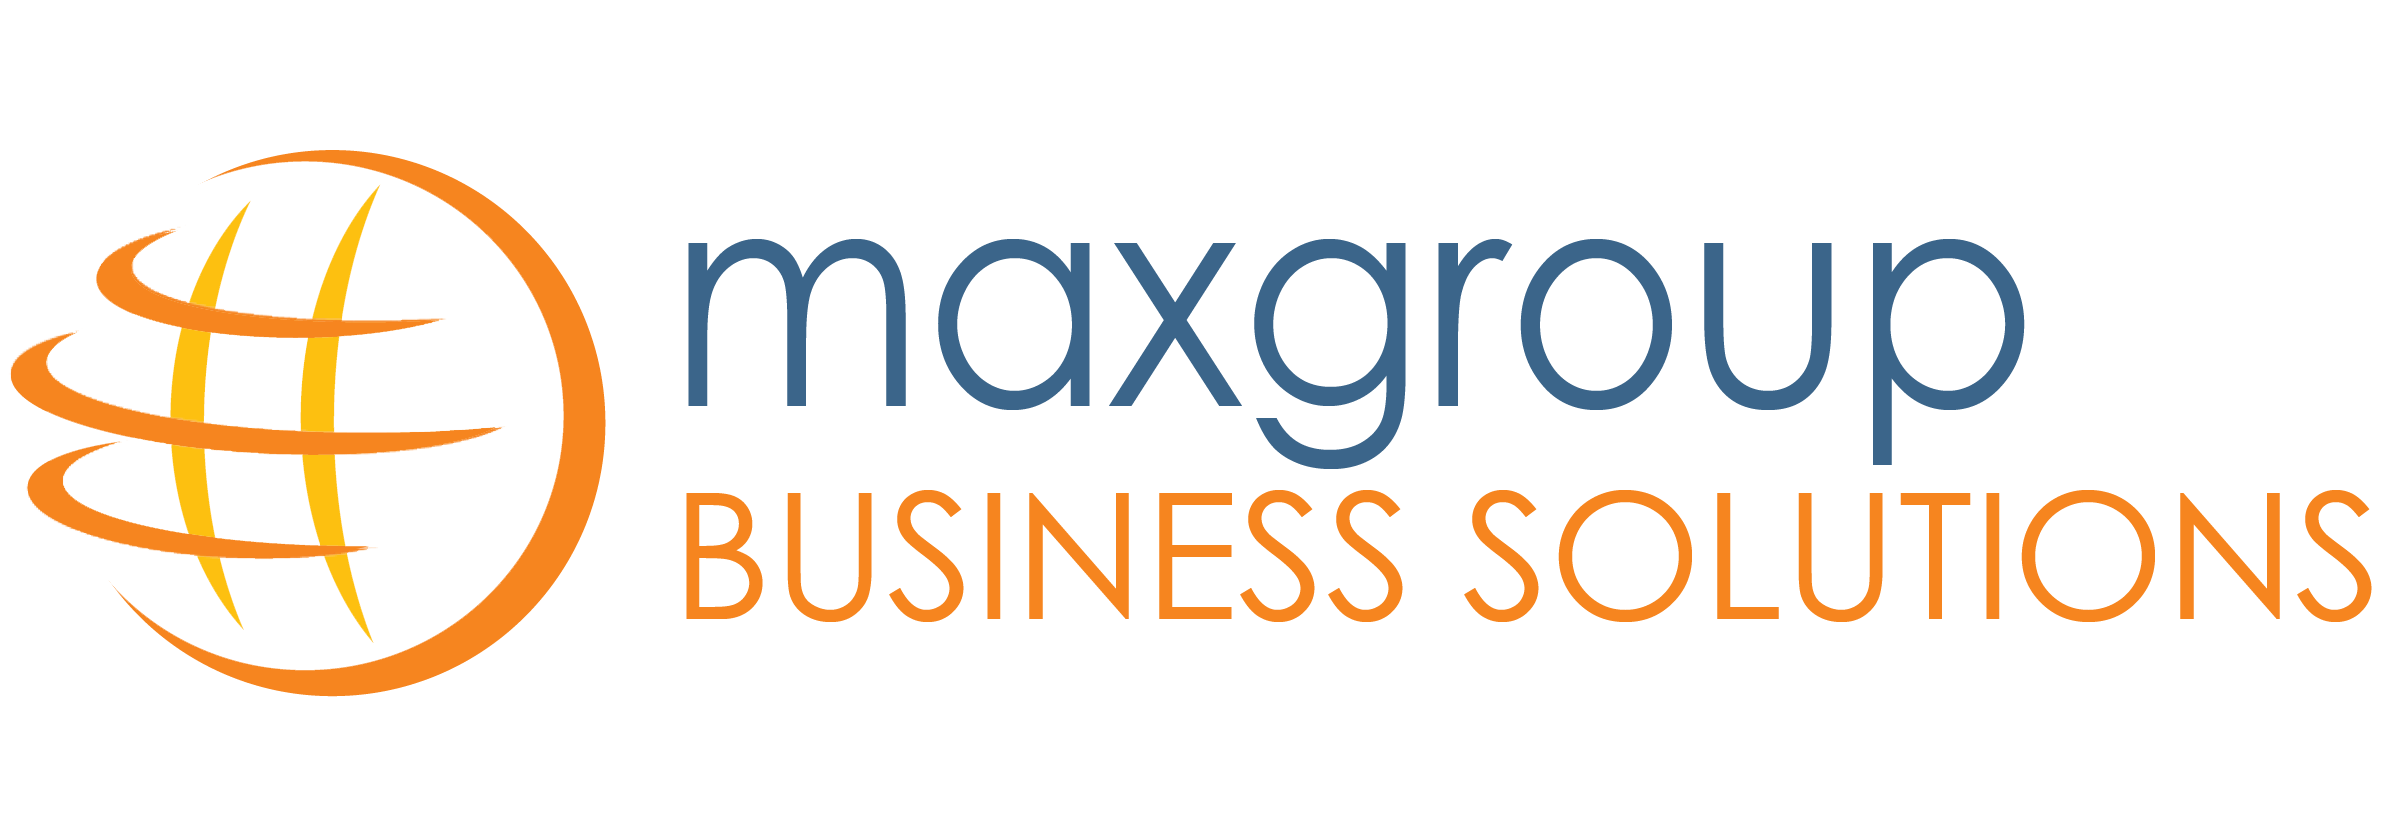 MaxGroup Business Solutions, LLC profile on Qualified.One